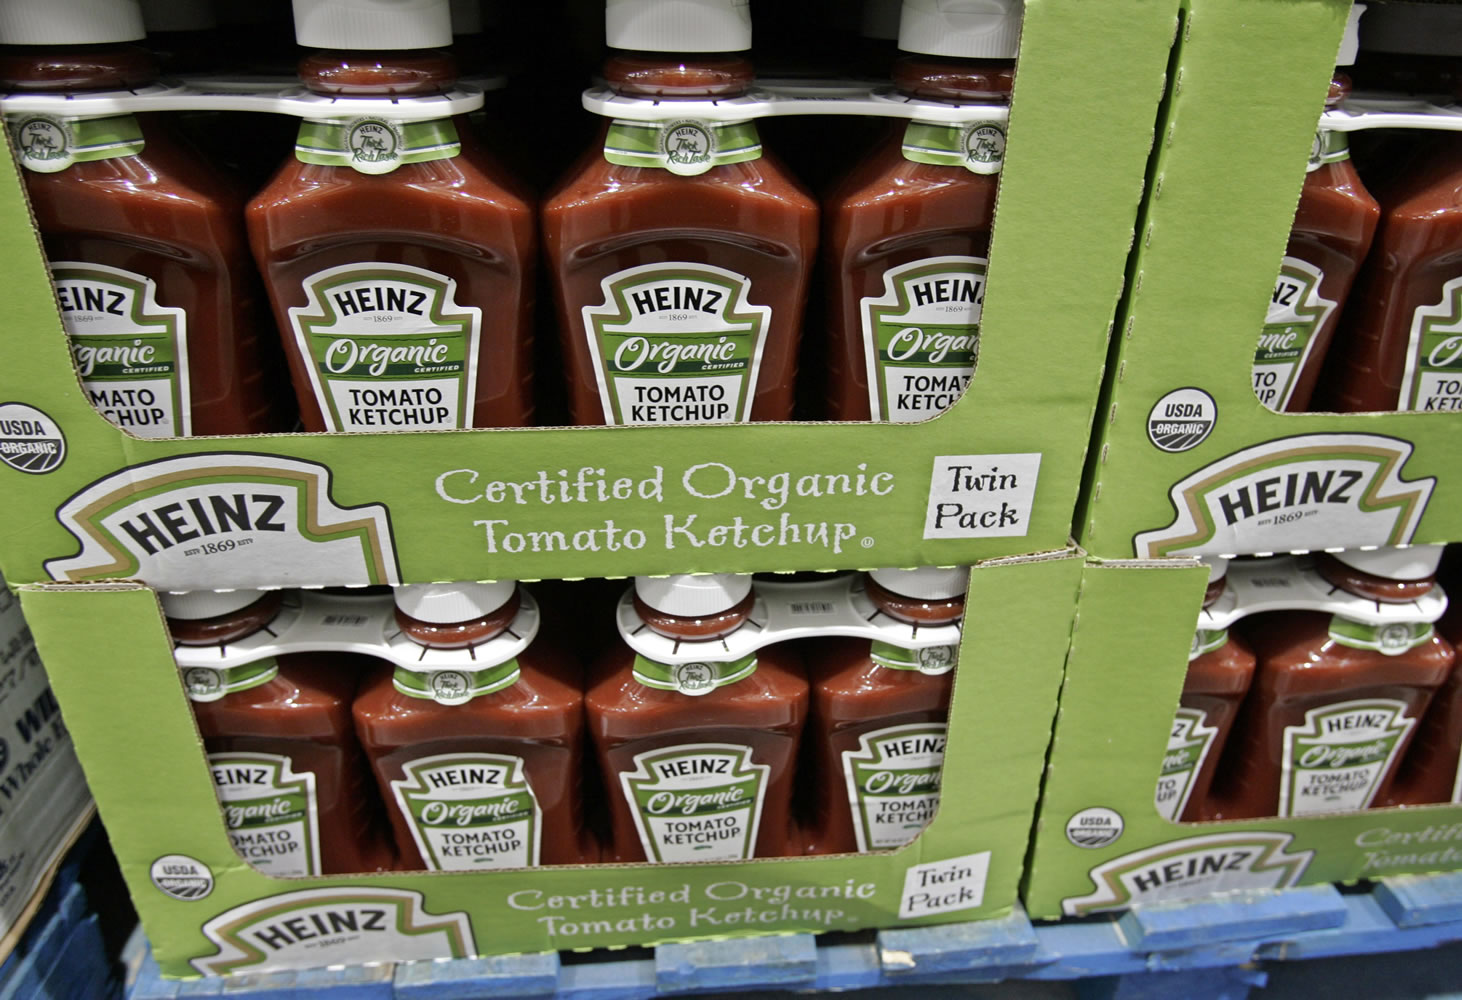 Heinz organic tomato ketchup is displayed for sale in February 2009 at Costco in Mountain View, Calif. The organic industry is gaining clout on Capitol Hill, prompted by rising consumer demand and its entry into traditional farm states. But that isn't going over well with everyone in Congress.